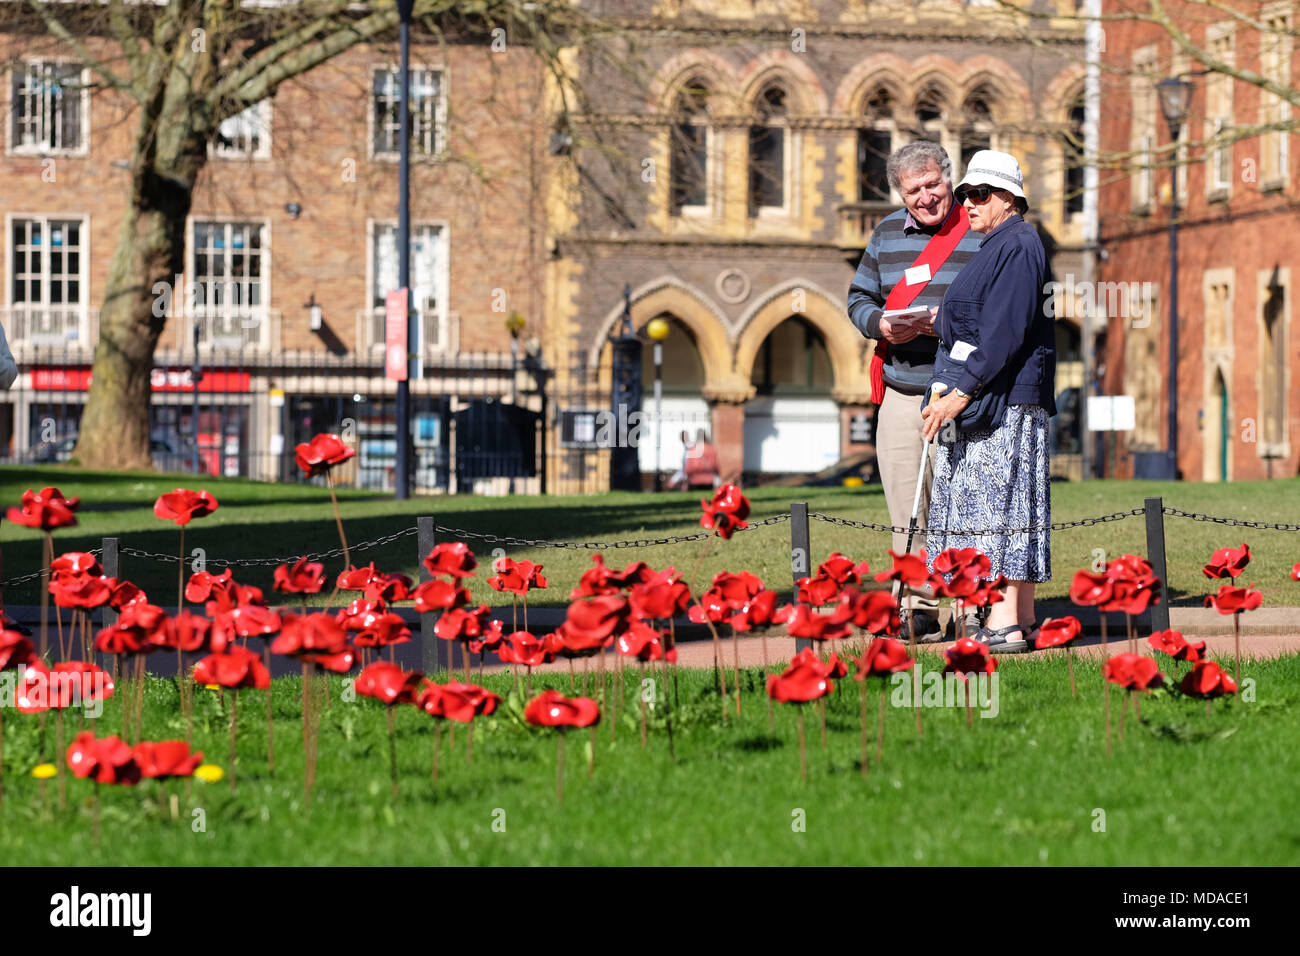 Hereford, Herefordshire - UK Weather - Thursday 19th April 2018  - Hot sunny Spring sunshine in Hereford with local temperatures up to a warm 23c - visitors enjoy the Weeping Window ceramic poppy display at Hereford cathedral which commemorates WW1 1914-1918. The Weeping Window display at Hereford cathedral finishes on April 29th - Photo Steven May / Alamy Live News Stock Photo